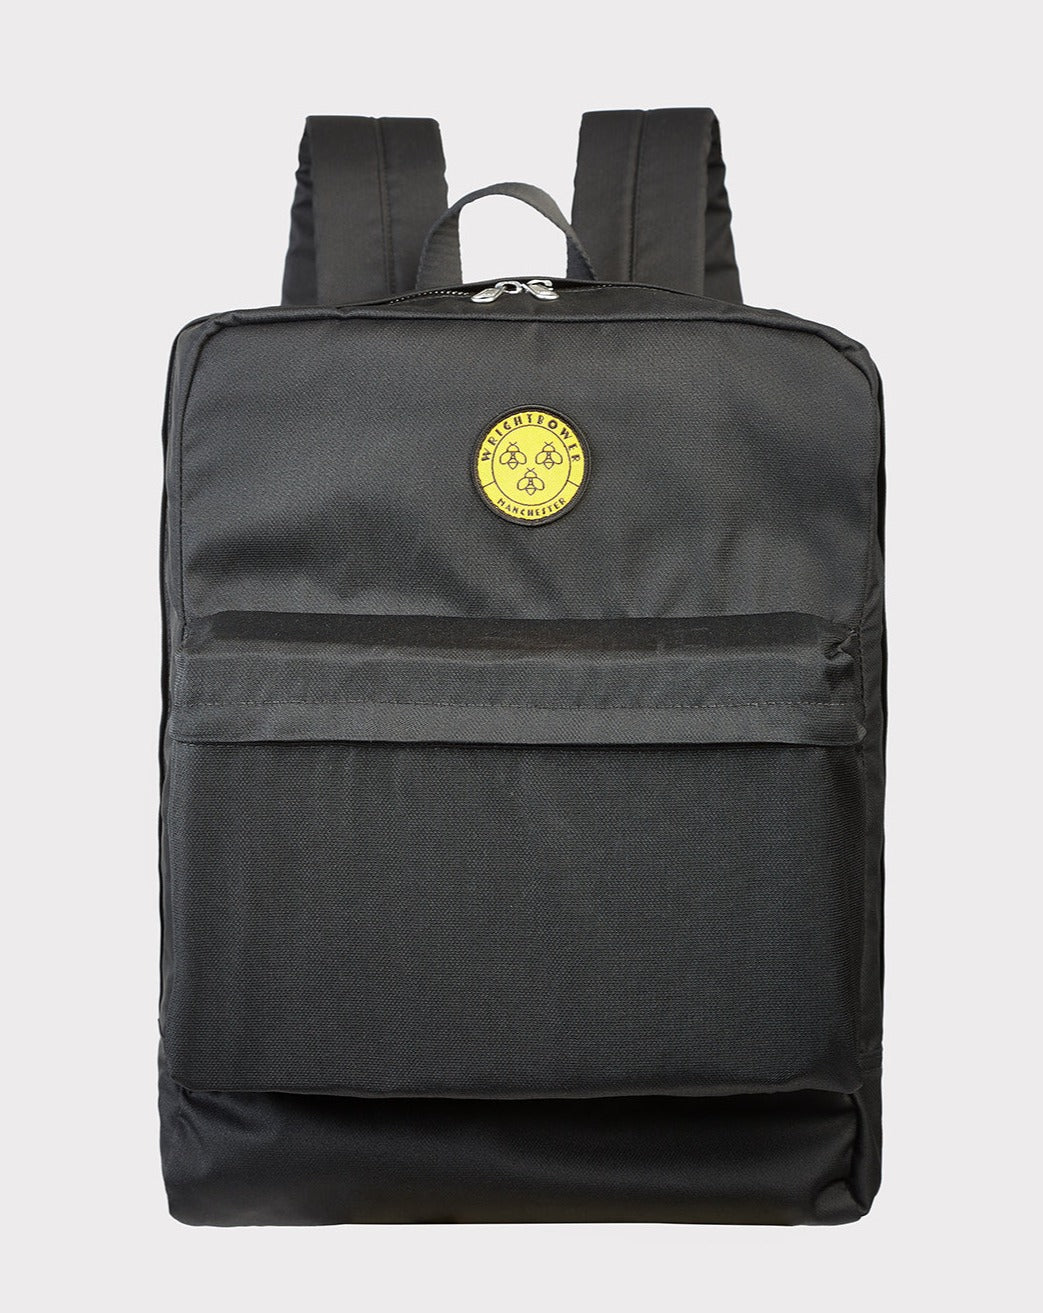 RIO - Classic Backpack in BLACK